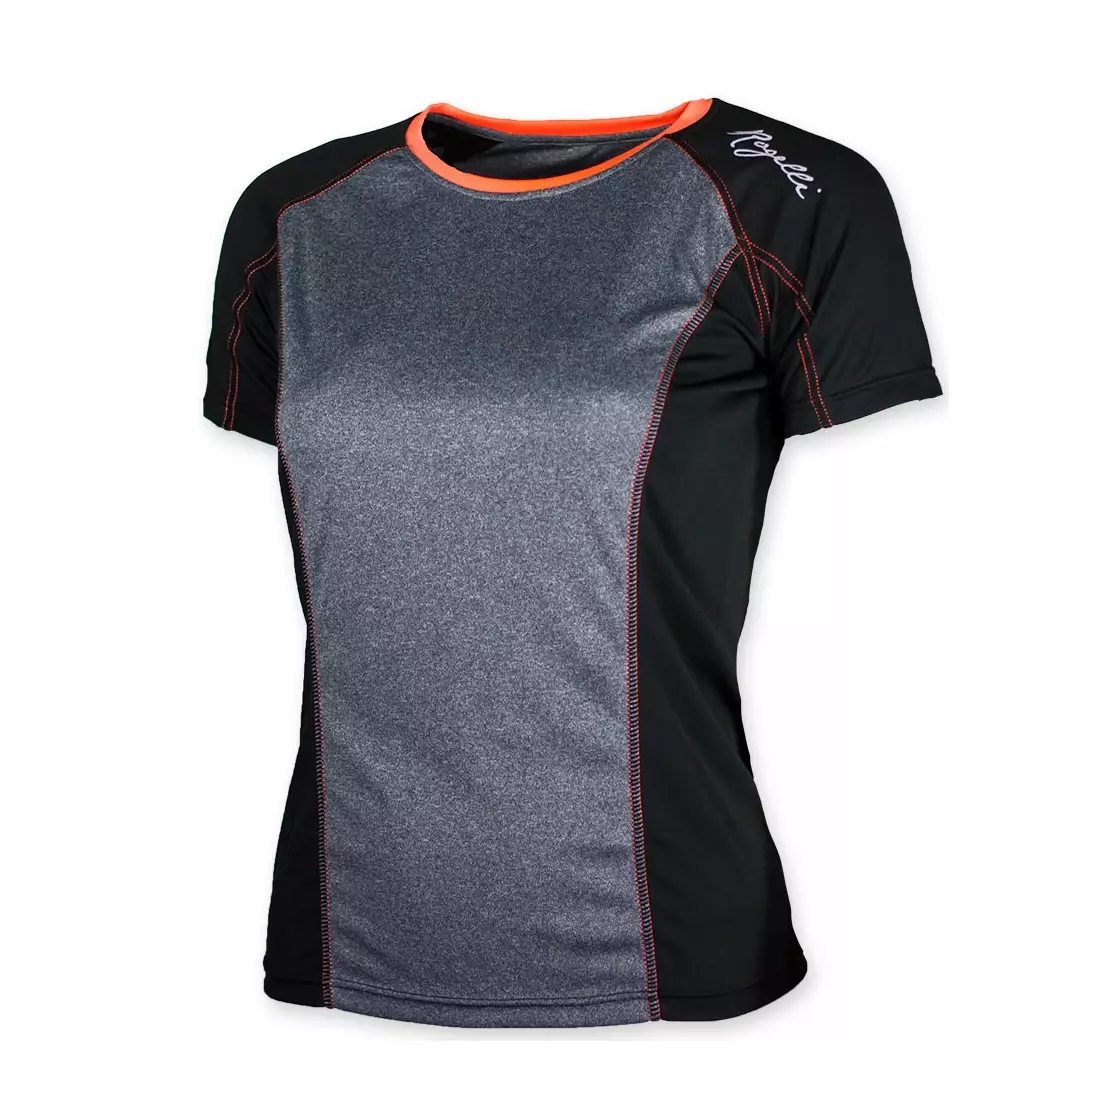 ROGELLI MAURIZIA - women's T-shirt K/R 840.260, black and pink (coral)